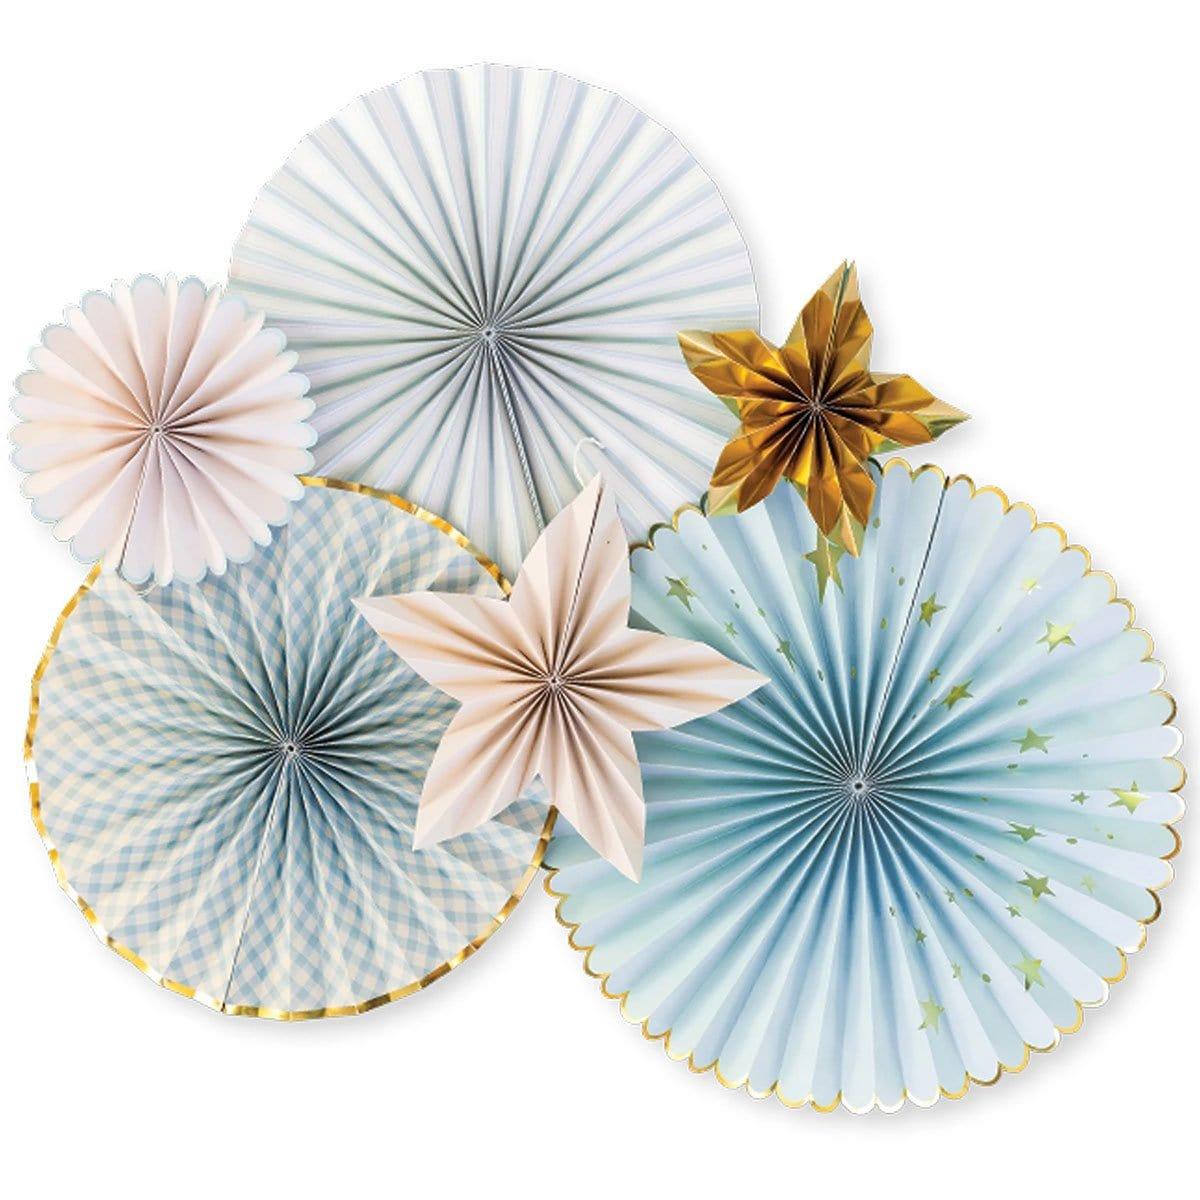 Buy Baby Shower Blue and Gold Paper Fan for Baby Shower sold at Party Expert